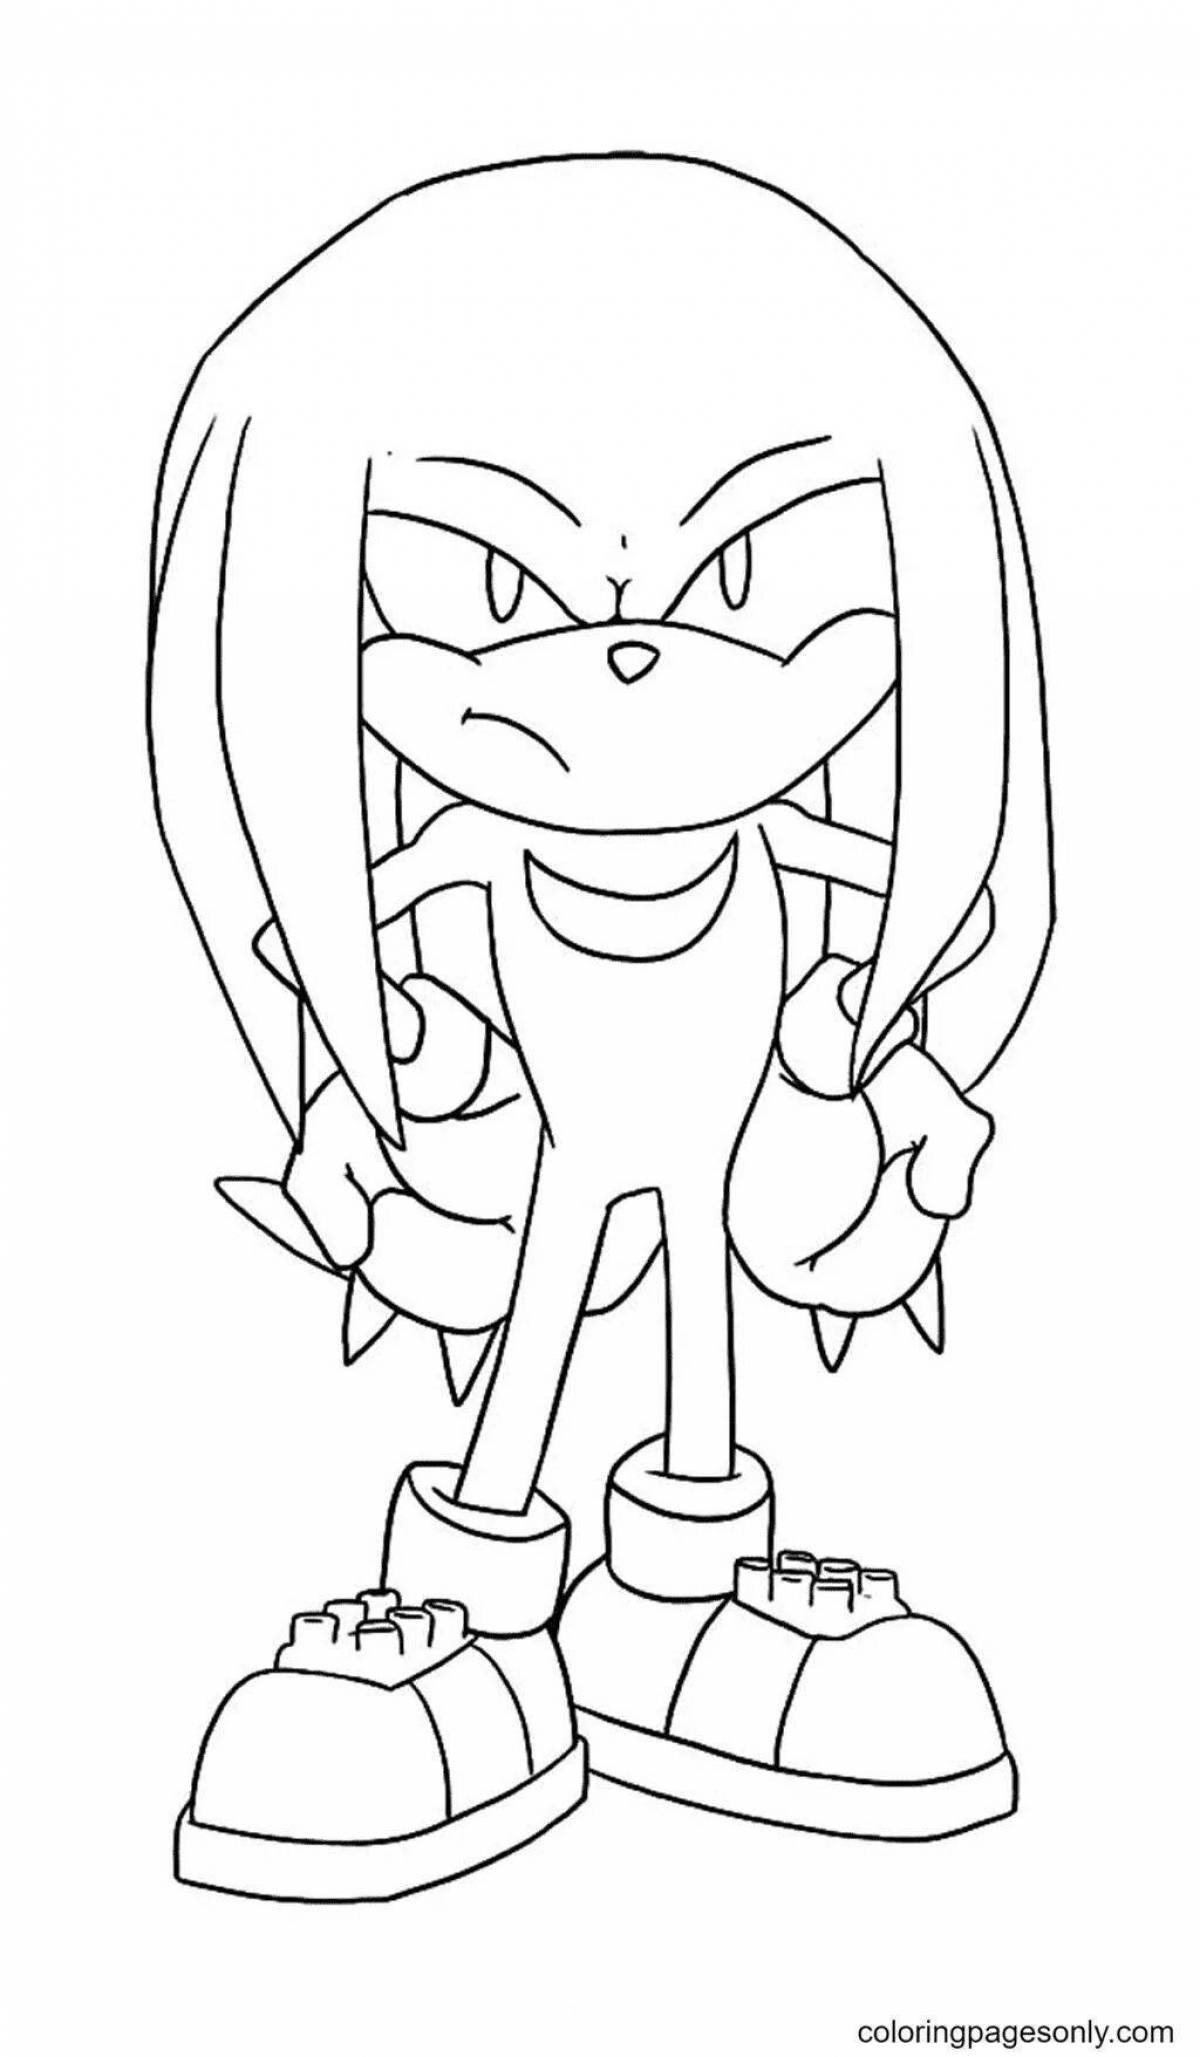 Playful coloring sonic knuckles